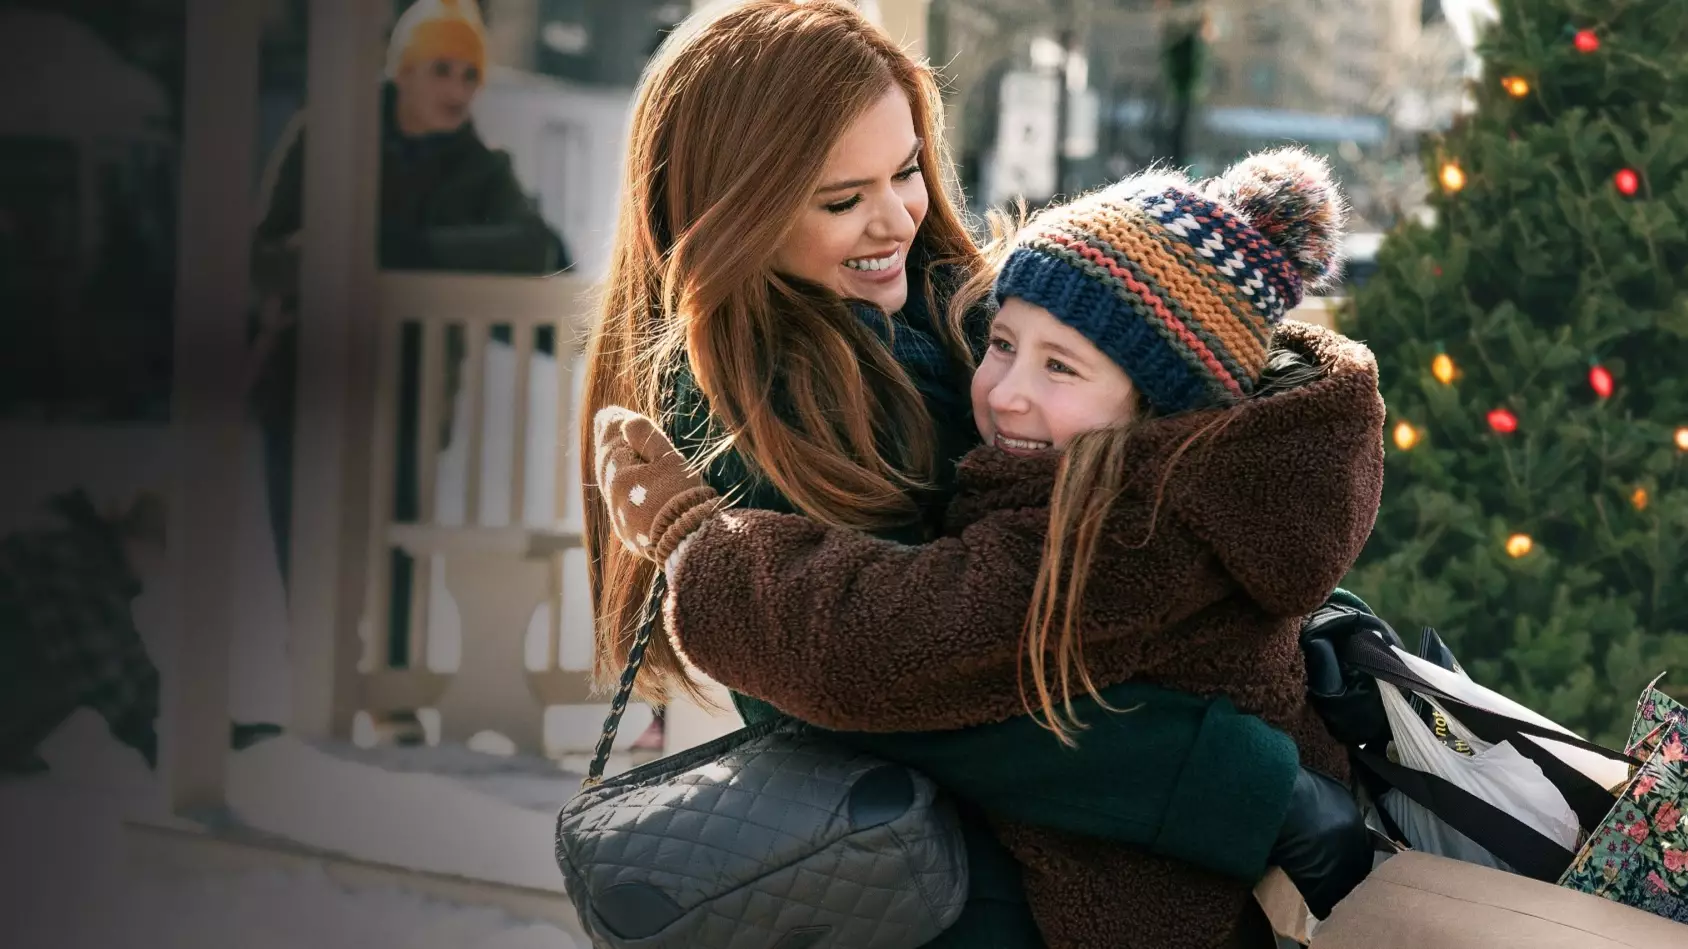 Trailer Drops For Disney's New Christmas Movie Starring Isla Fisher